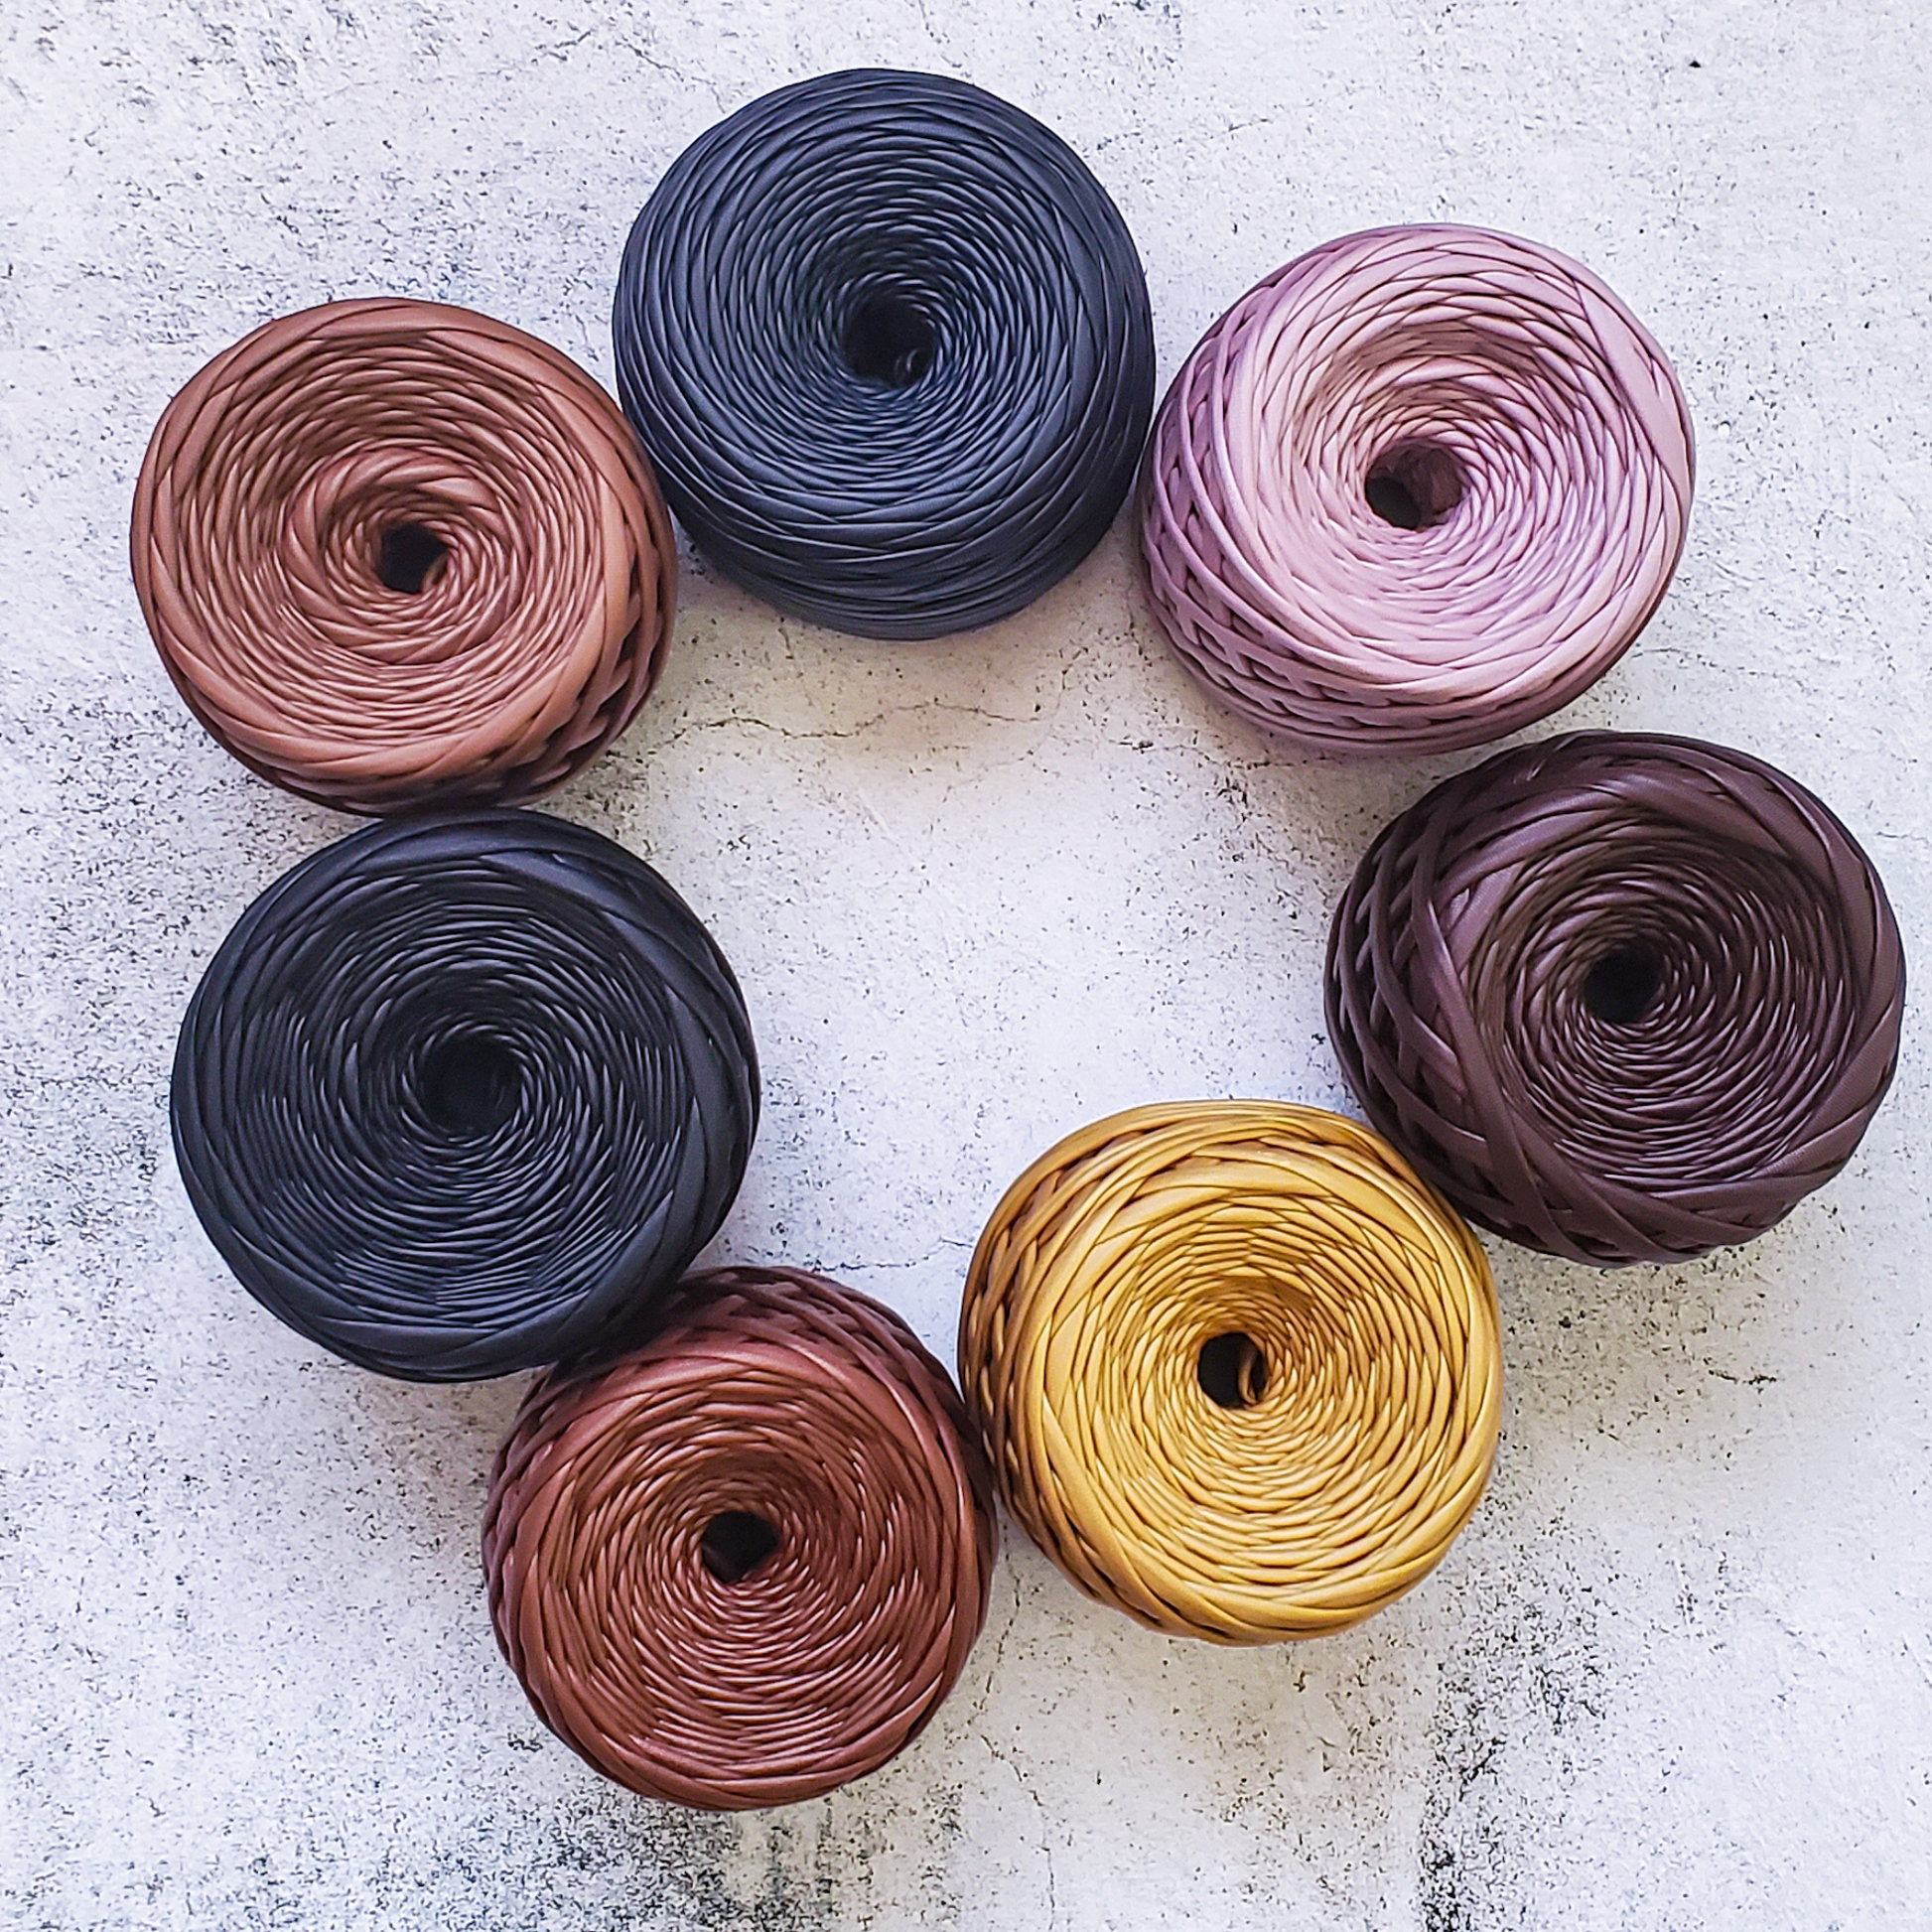 Leather looking T-shirt yarn for crocheting baskets, bags, rugs